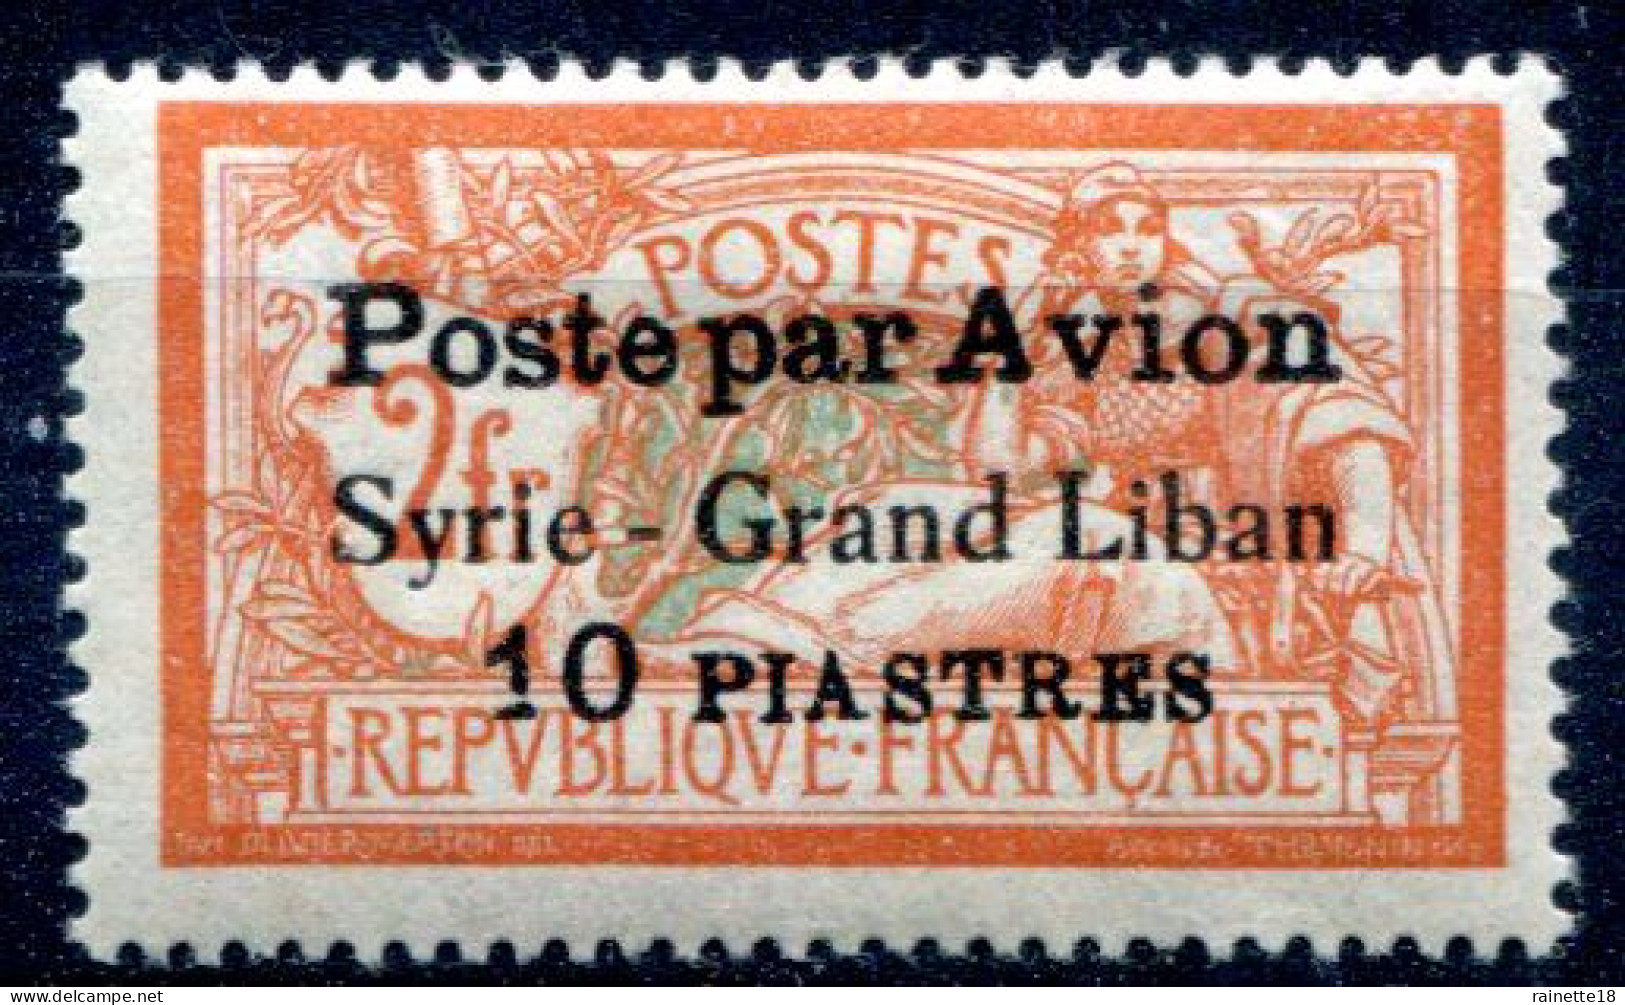 Syrie     PA  17 * - Airmail